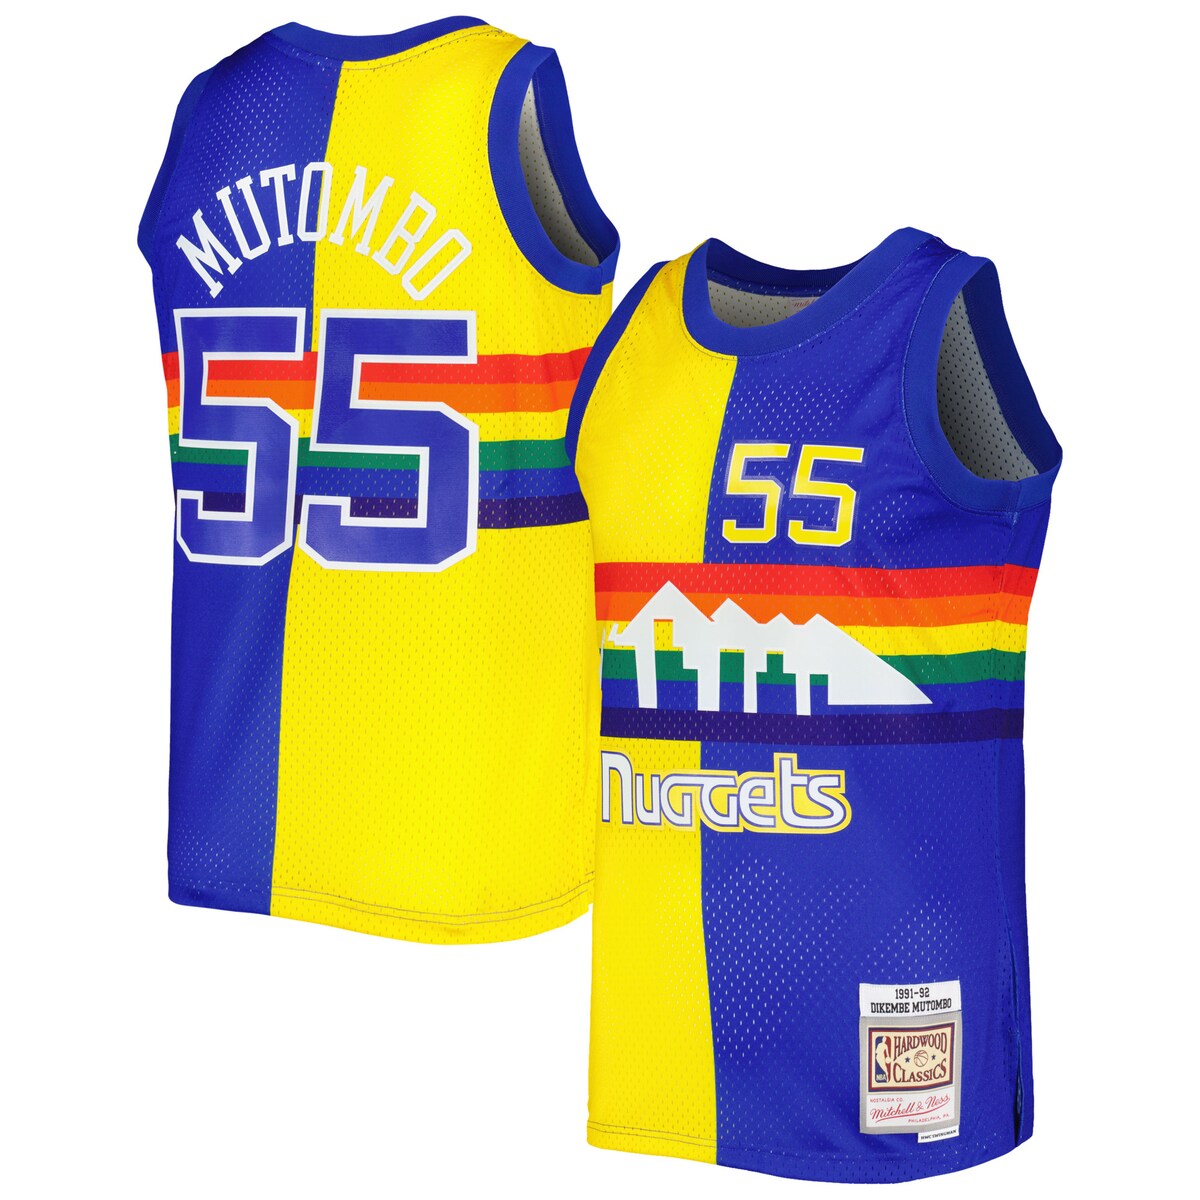 Showcase your timeless love for one of the Denver Nuggets' greatest players of all time in a trendy, distinct way with this 1991/92 Dikembe Mutombo Split Swingman jersey by Mitchell & Ness. This Hardwood Classics jersey features vibrant team and Dikembe Mutombo graphics across a unique split design, allowing you to boast your spirit loud and proud. Additionally, the lightweight construction, sleeveless design and breezy mesh fabric bring comfort and breathability to your Denver Nuggets fandom.Mesh fabricSwingman ThrowbackOfficially licensedMachine wash, line dryMaterial: 100% PolyesterSleevelessSplit hemBrand: Mitchell & NessImportedSublimated graphicsHeat-sealed fabric appliquesWoven jock tag